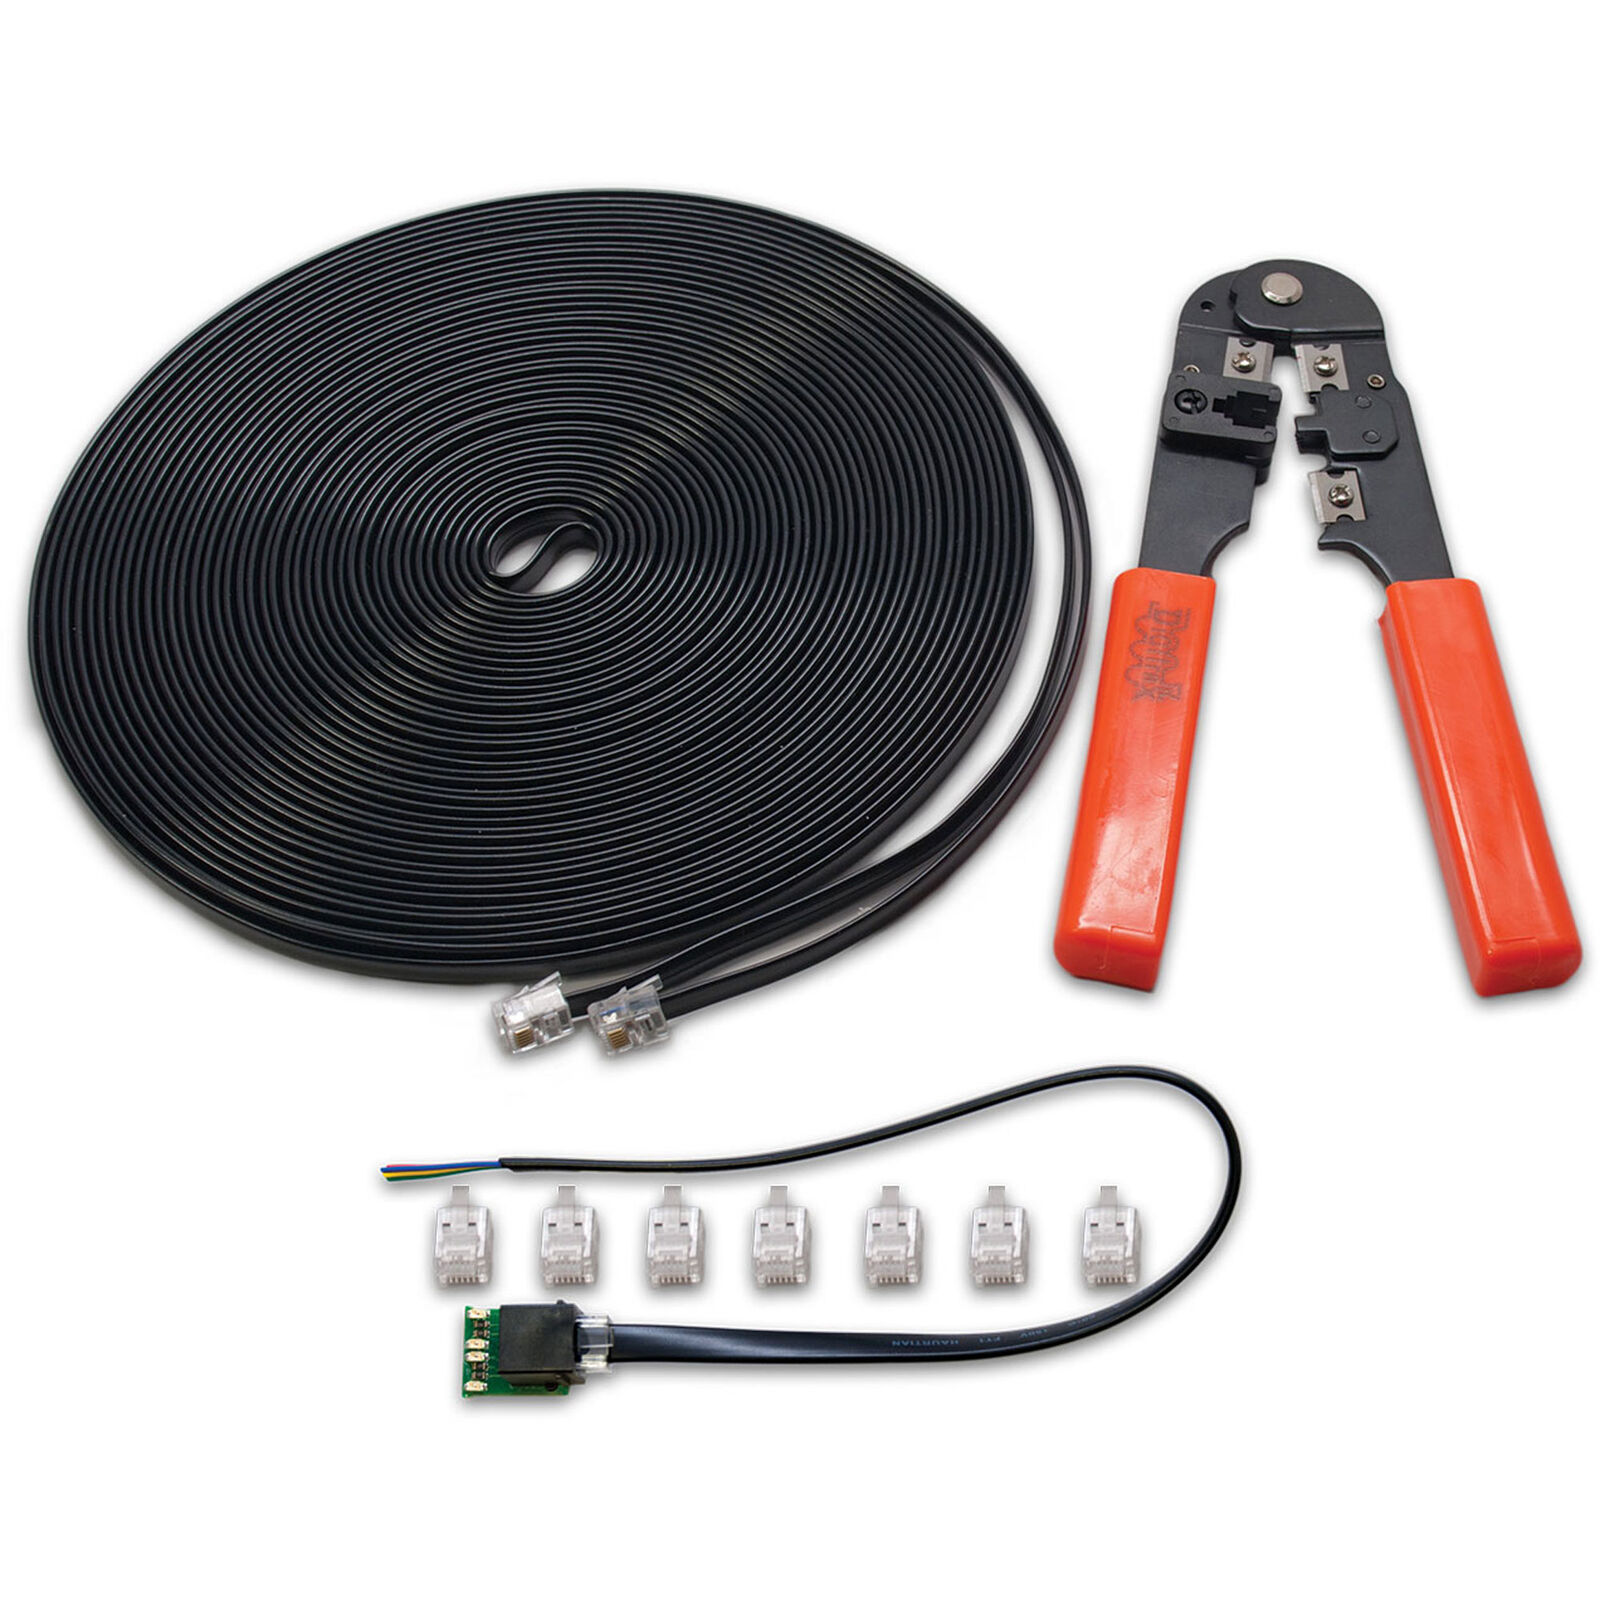 LocoNet Cable Maker Kit